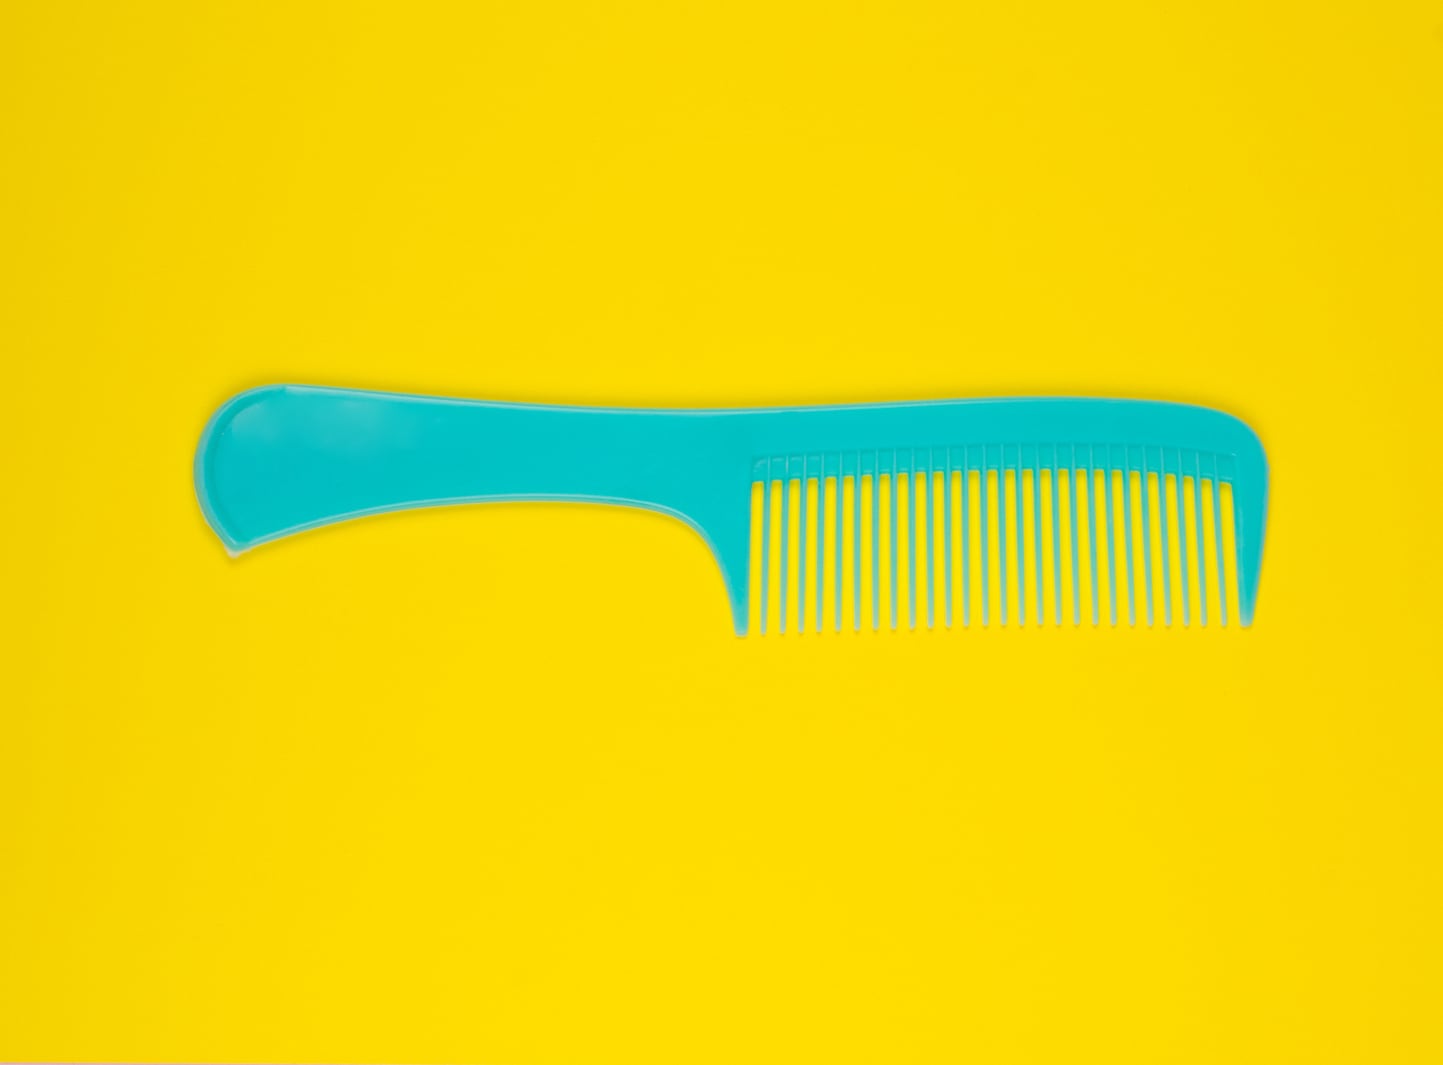 Here’s how a simple comb could take the edge off labor pain